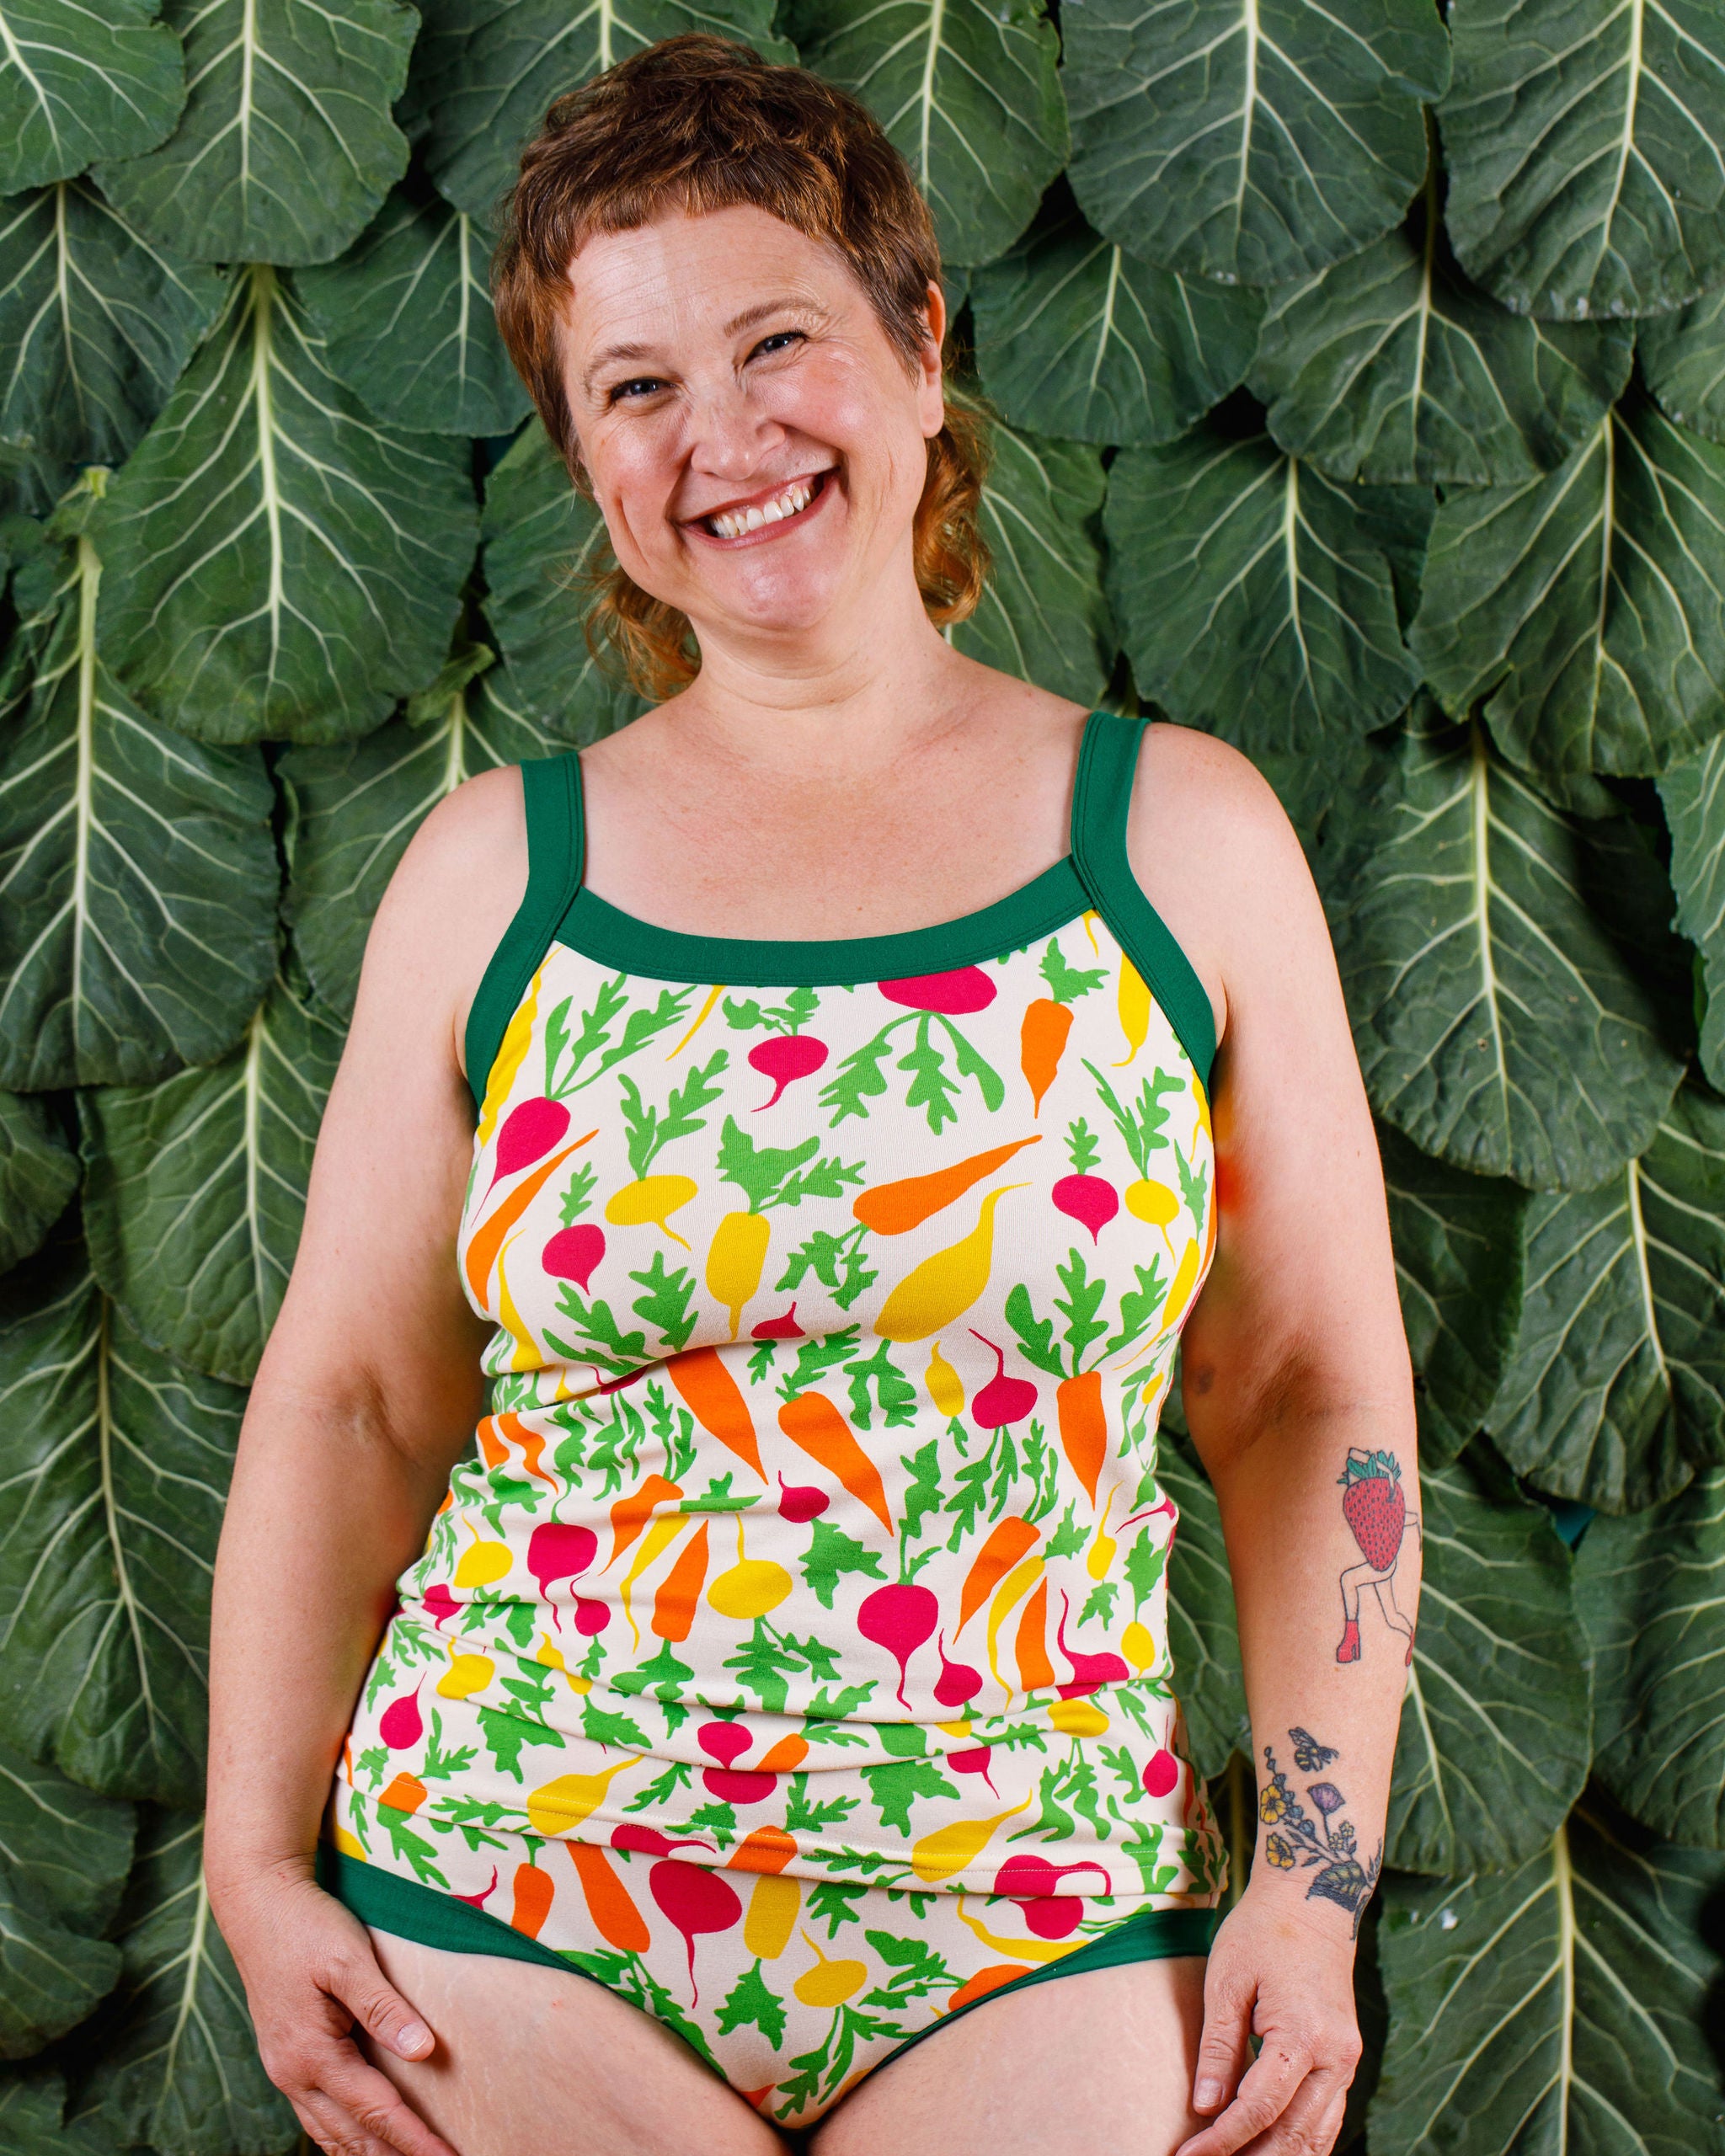 Model smiling wearing Thunderants Camisole in Root Veggies print - yellow, orange, pink, and green vegetables.